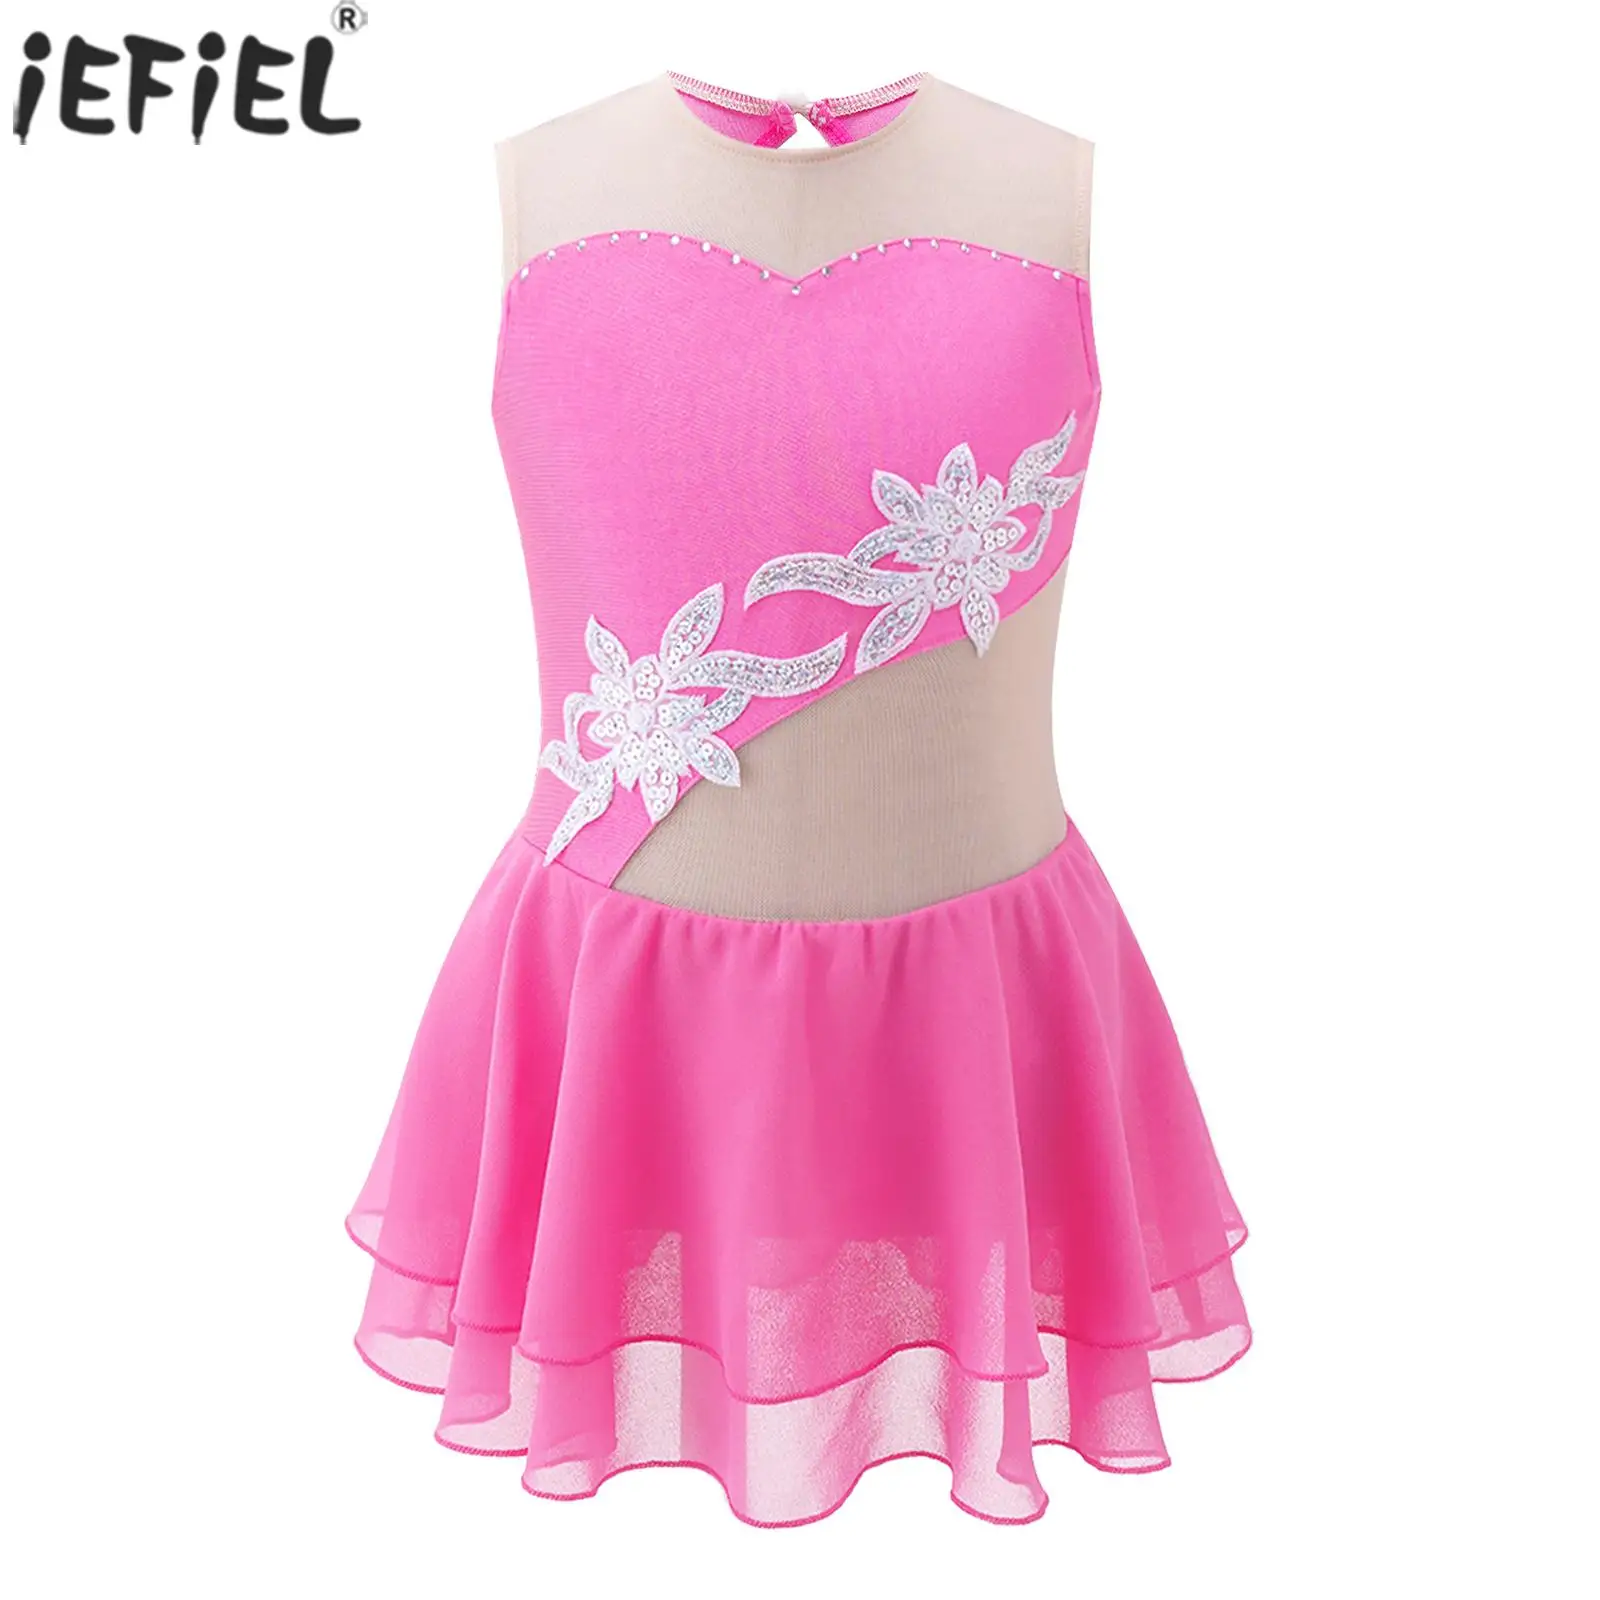 

Kids Girls Shiny Sequin Floral Ballet Dance Dress Skirted Leotard Figure Ice Skating Competition Stage Performance Costumes